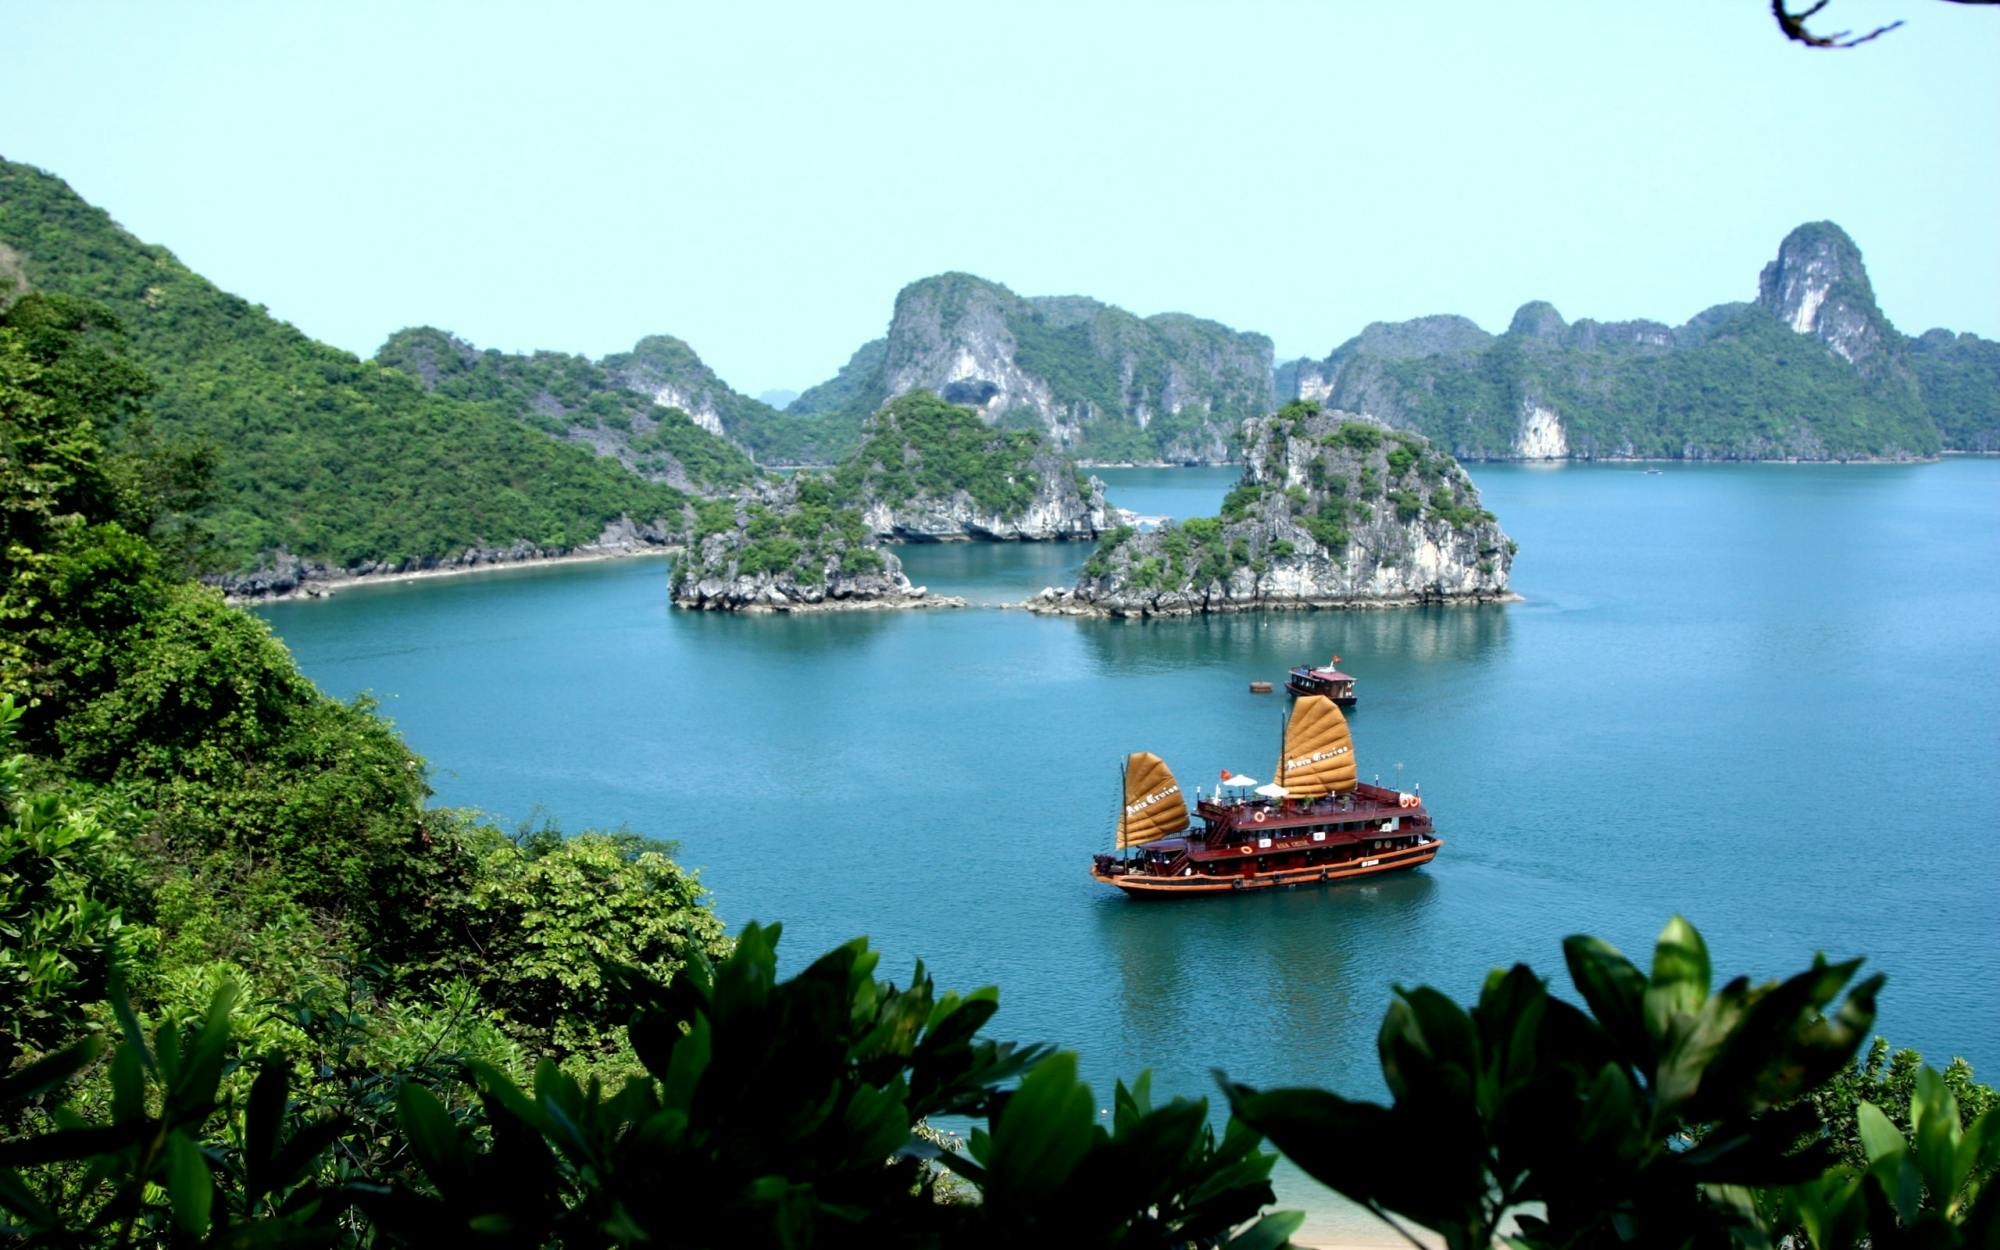 Halong Bay 3 days and 2 nights on boat cruise from Hanoi Musement